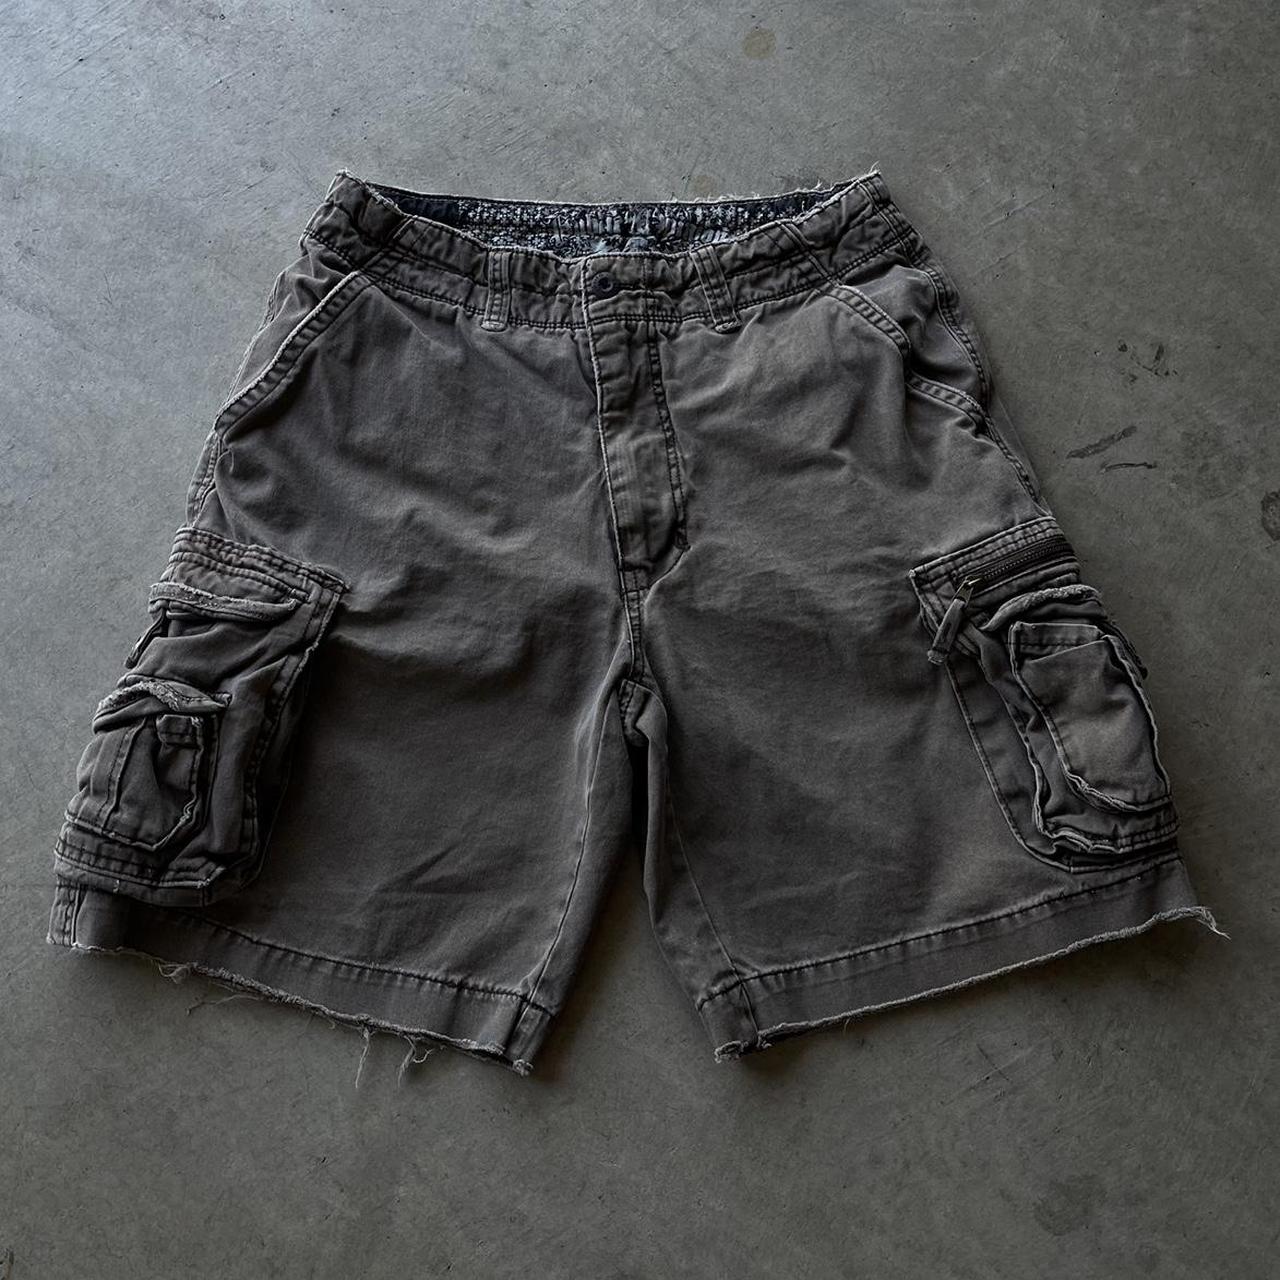 Y2k grunge baggy cargo shorts 2000s cargos with a... - Depop